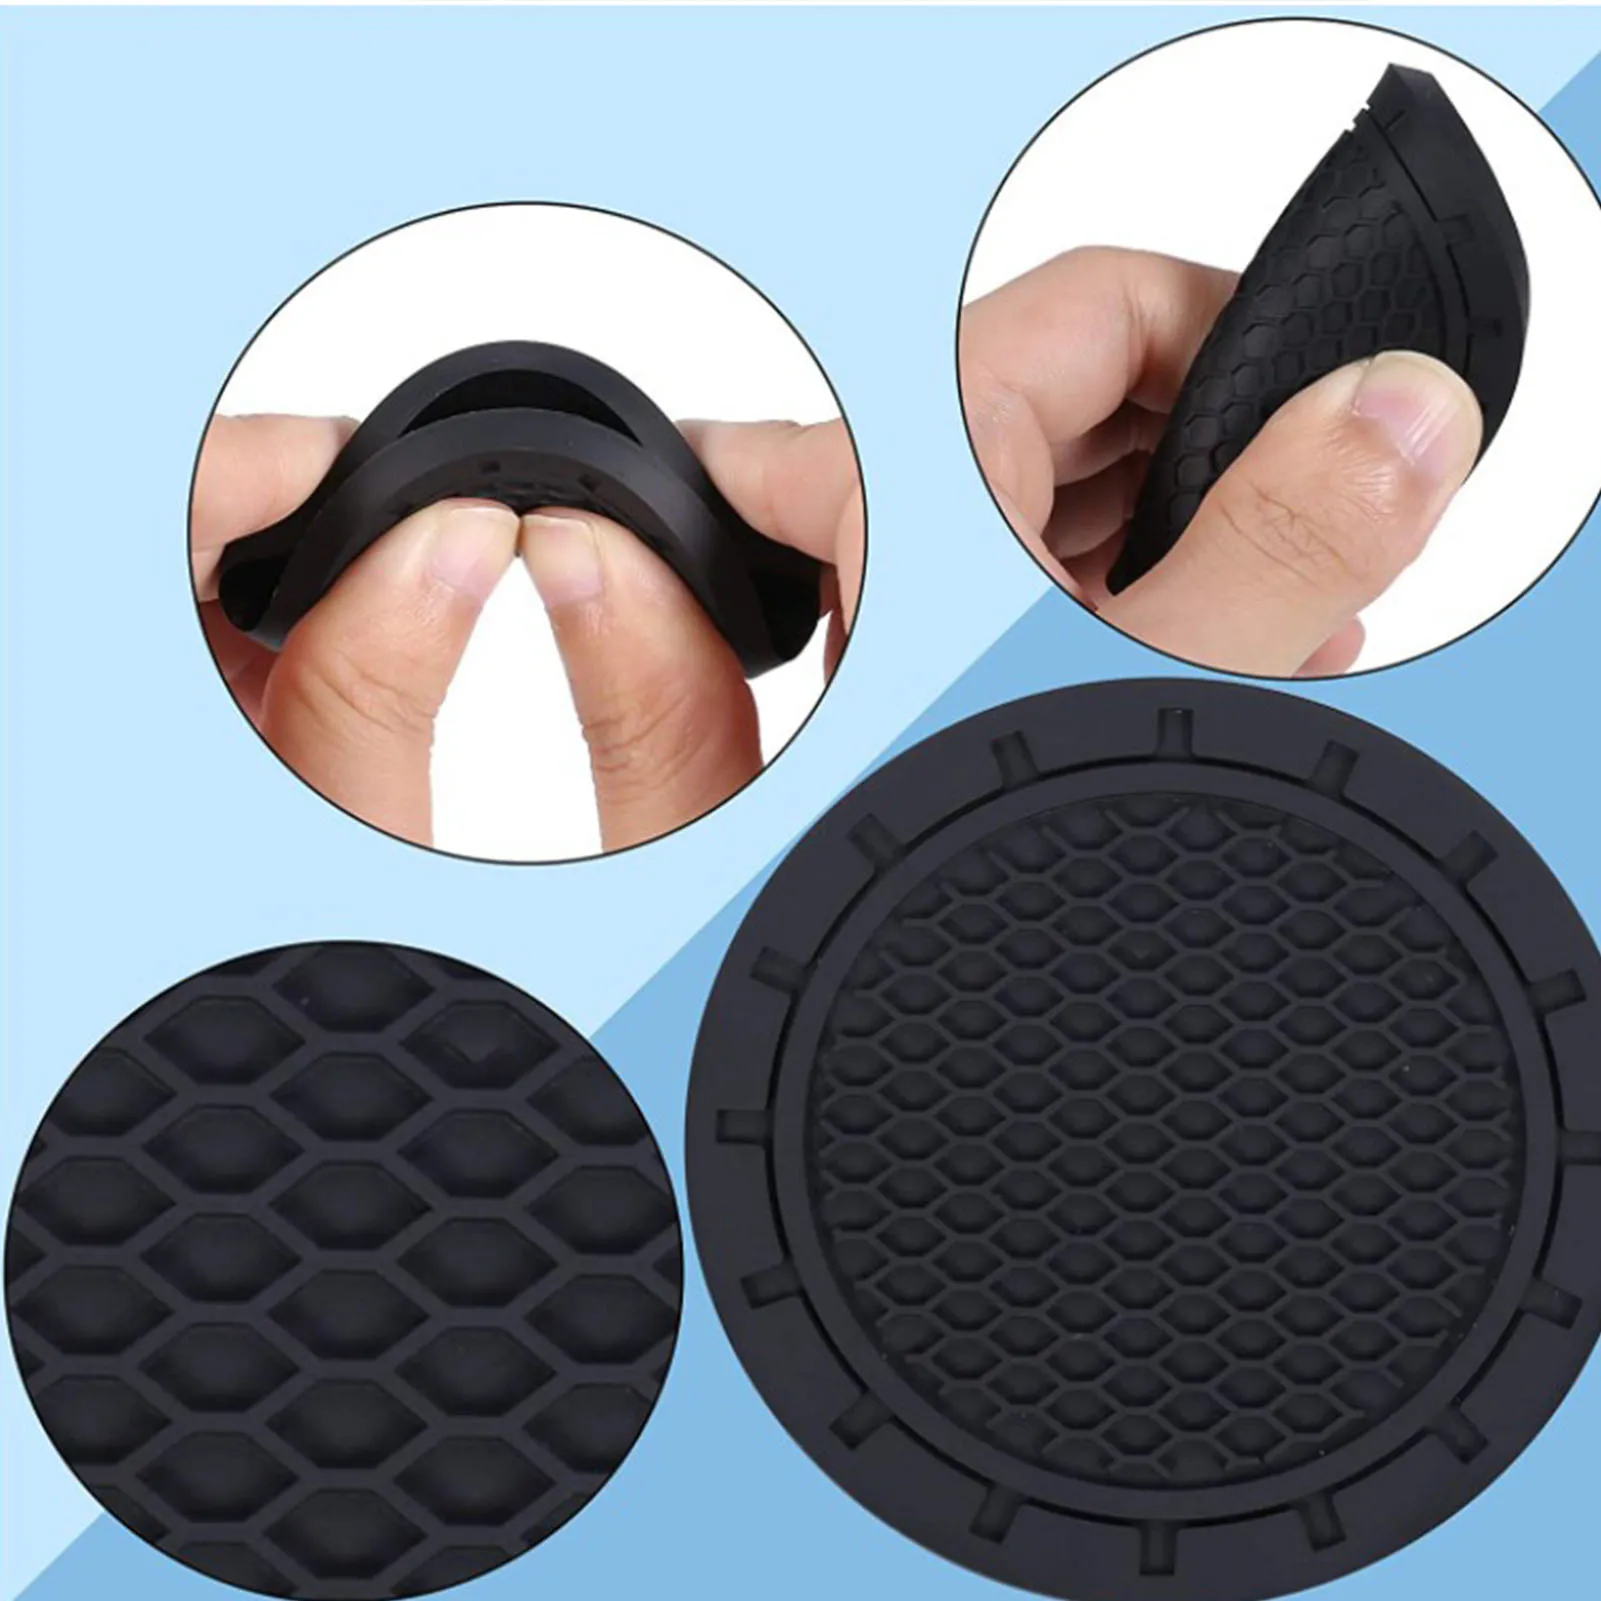 4pcs Car Coaster Water Cup Bottle Holder Anti-slip Pad Mat Silica Gel For Interior Decoration Car Styling Accessories 7X7X 0.5cm